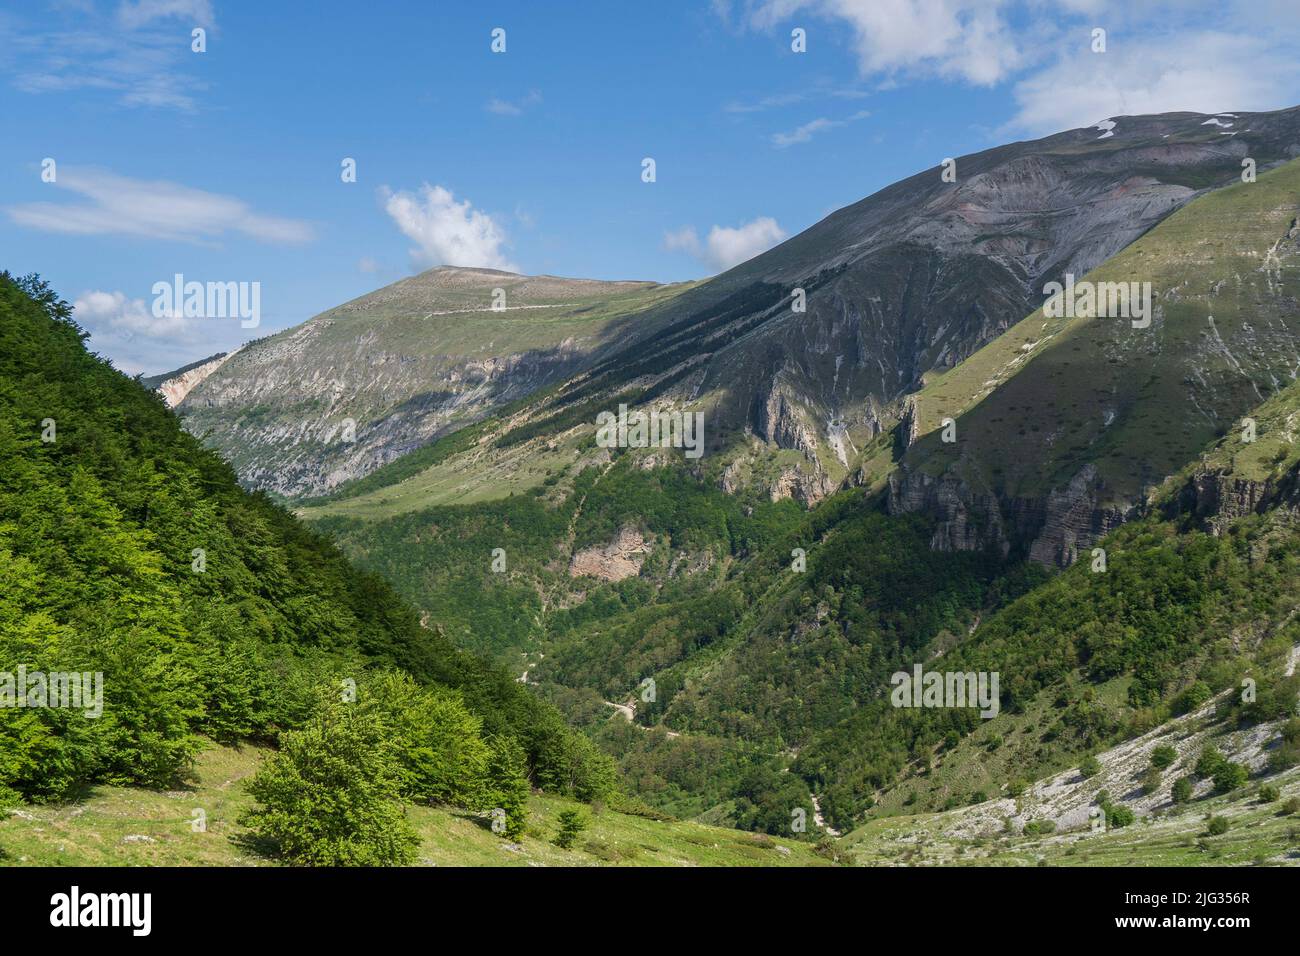 Monti Sibillini National Park, View  from the Paths of Val di Panico, Ussita, Marche, Italy, Europe Stock Photo